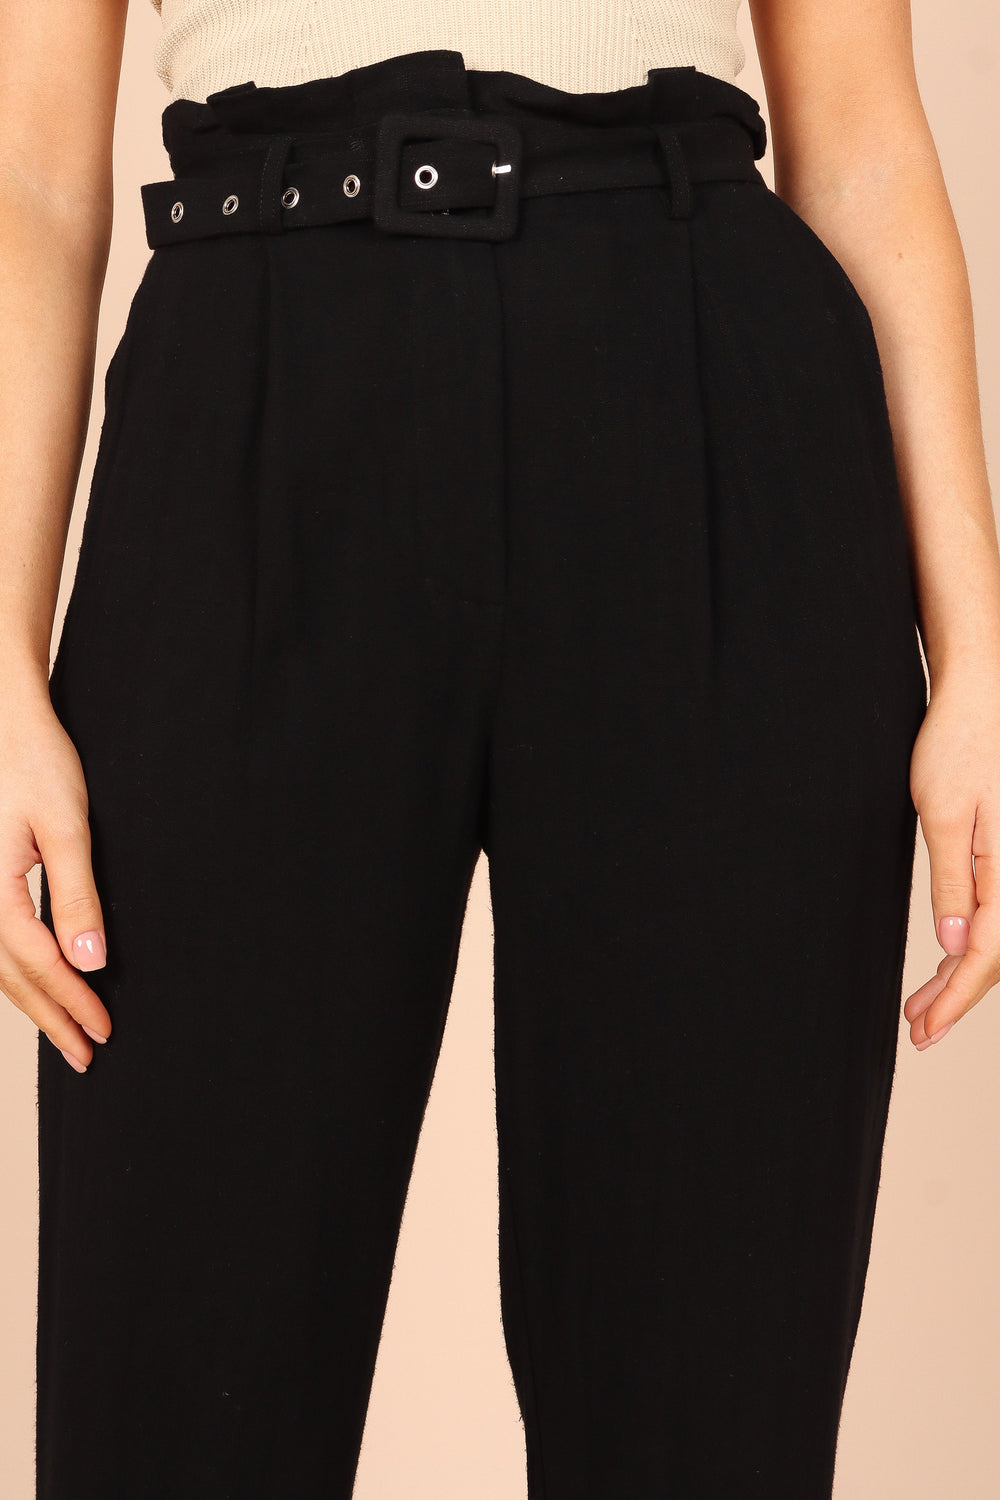 Half Belted Trousers Black  SourceUnknown